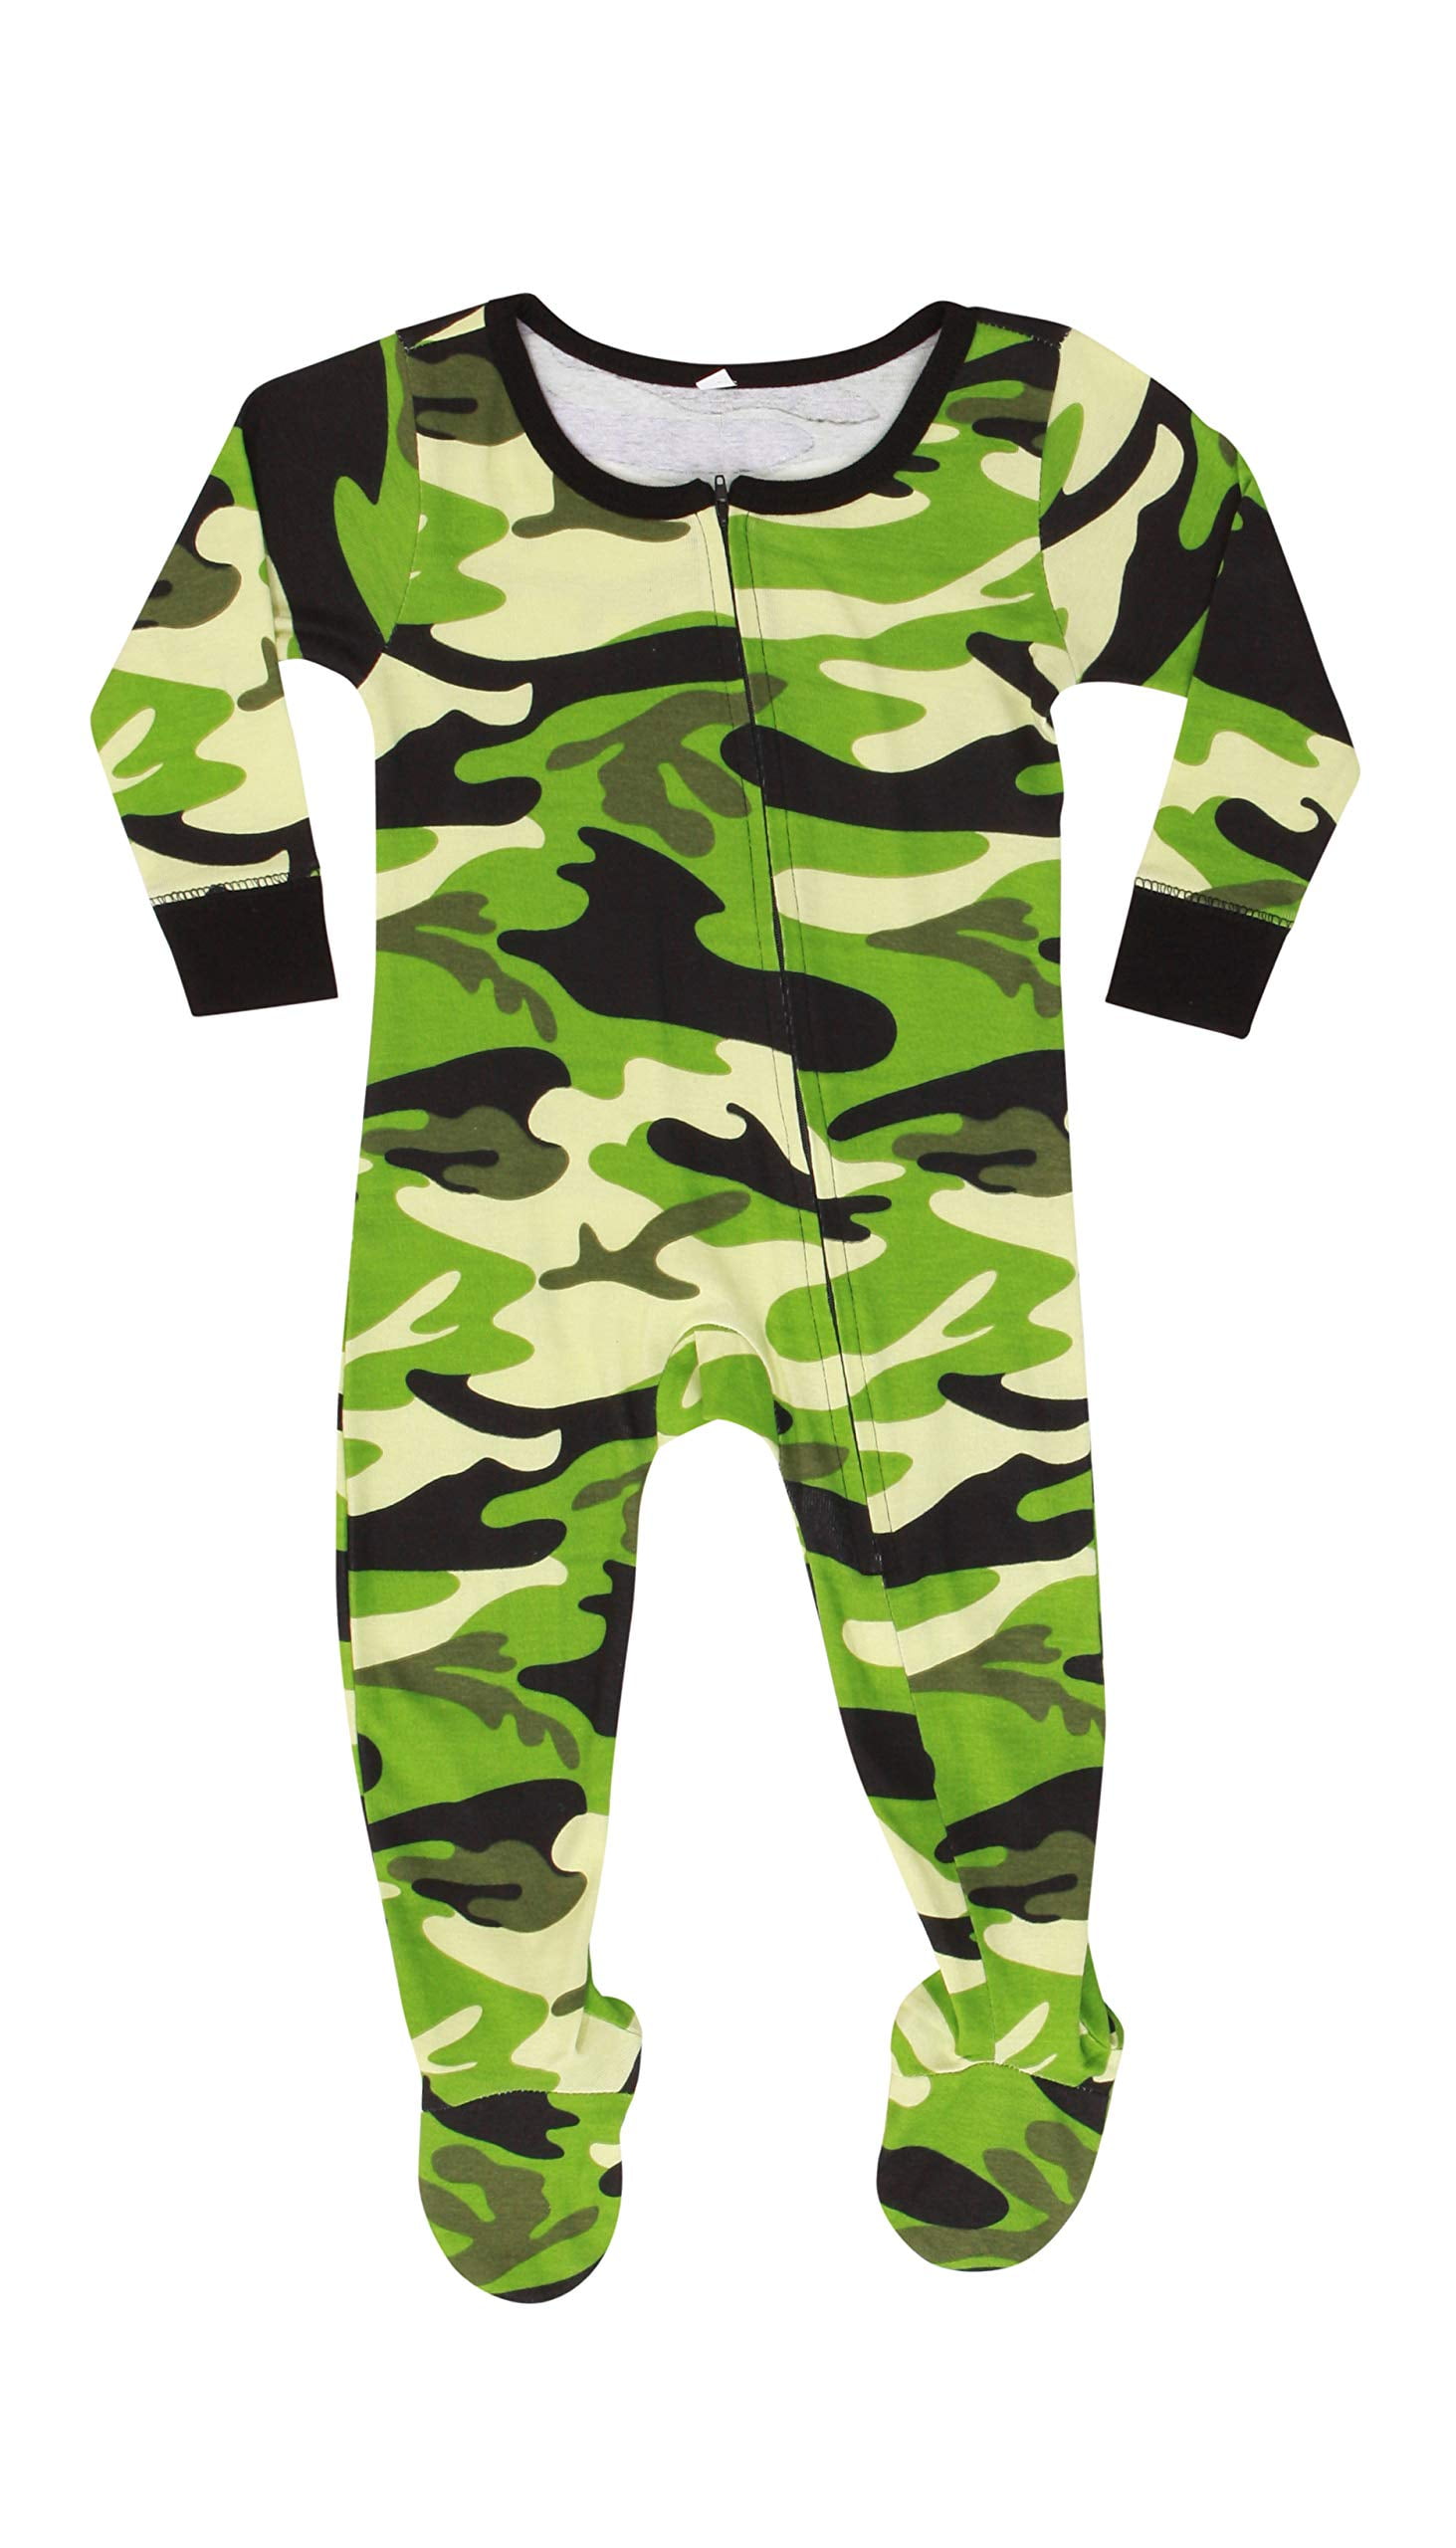 followme Matching Christmas Pajamas for Family or Couples (Camouflage, Kids  3T) 